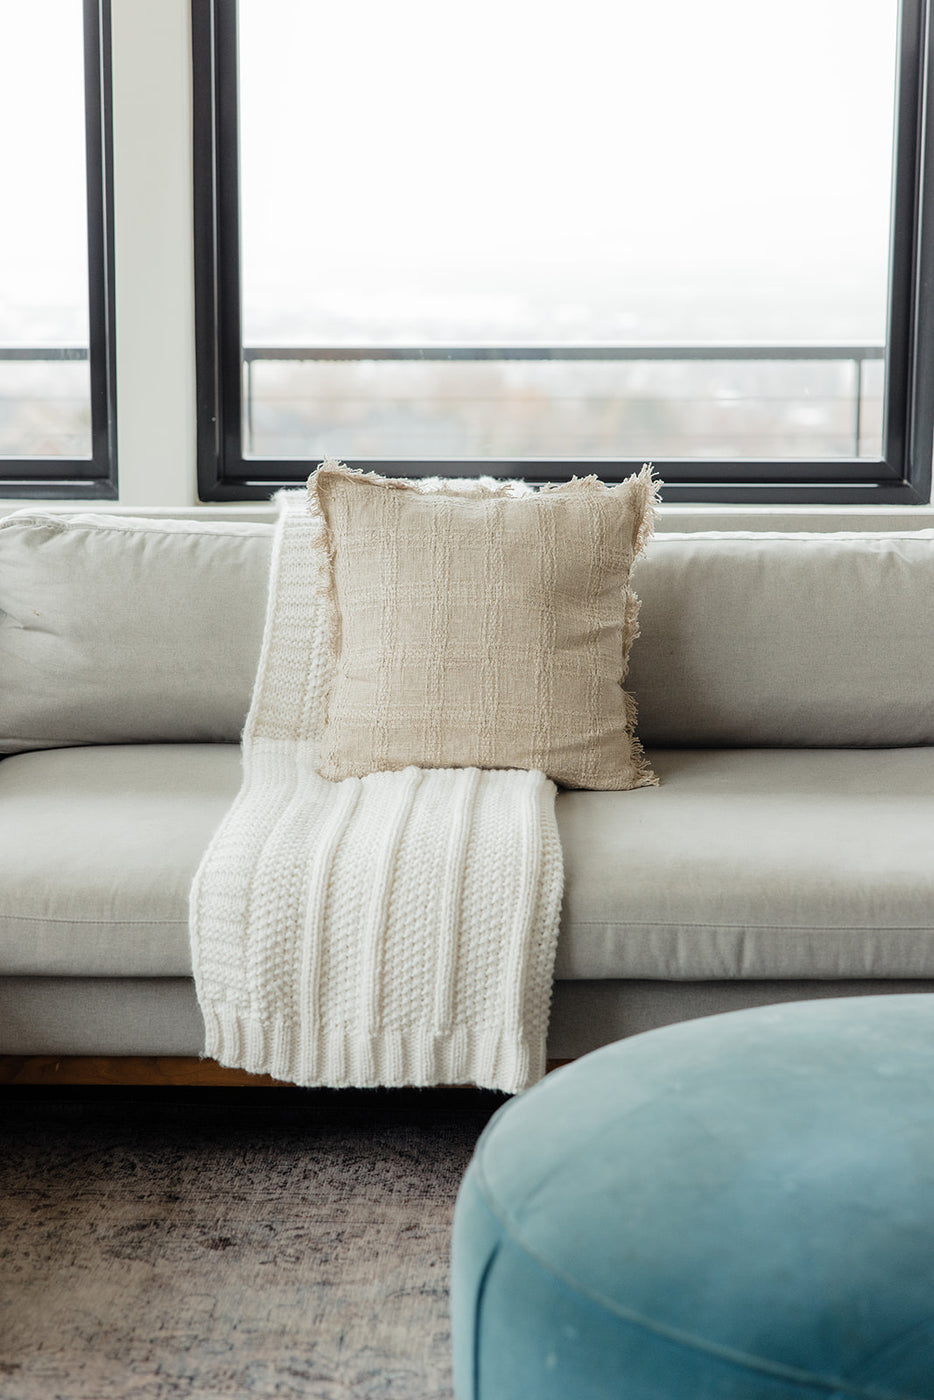 a white blanket on a couch